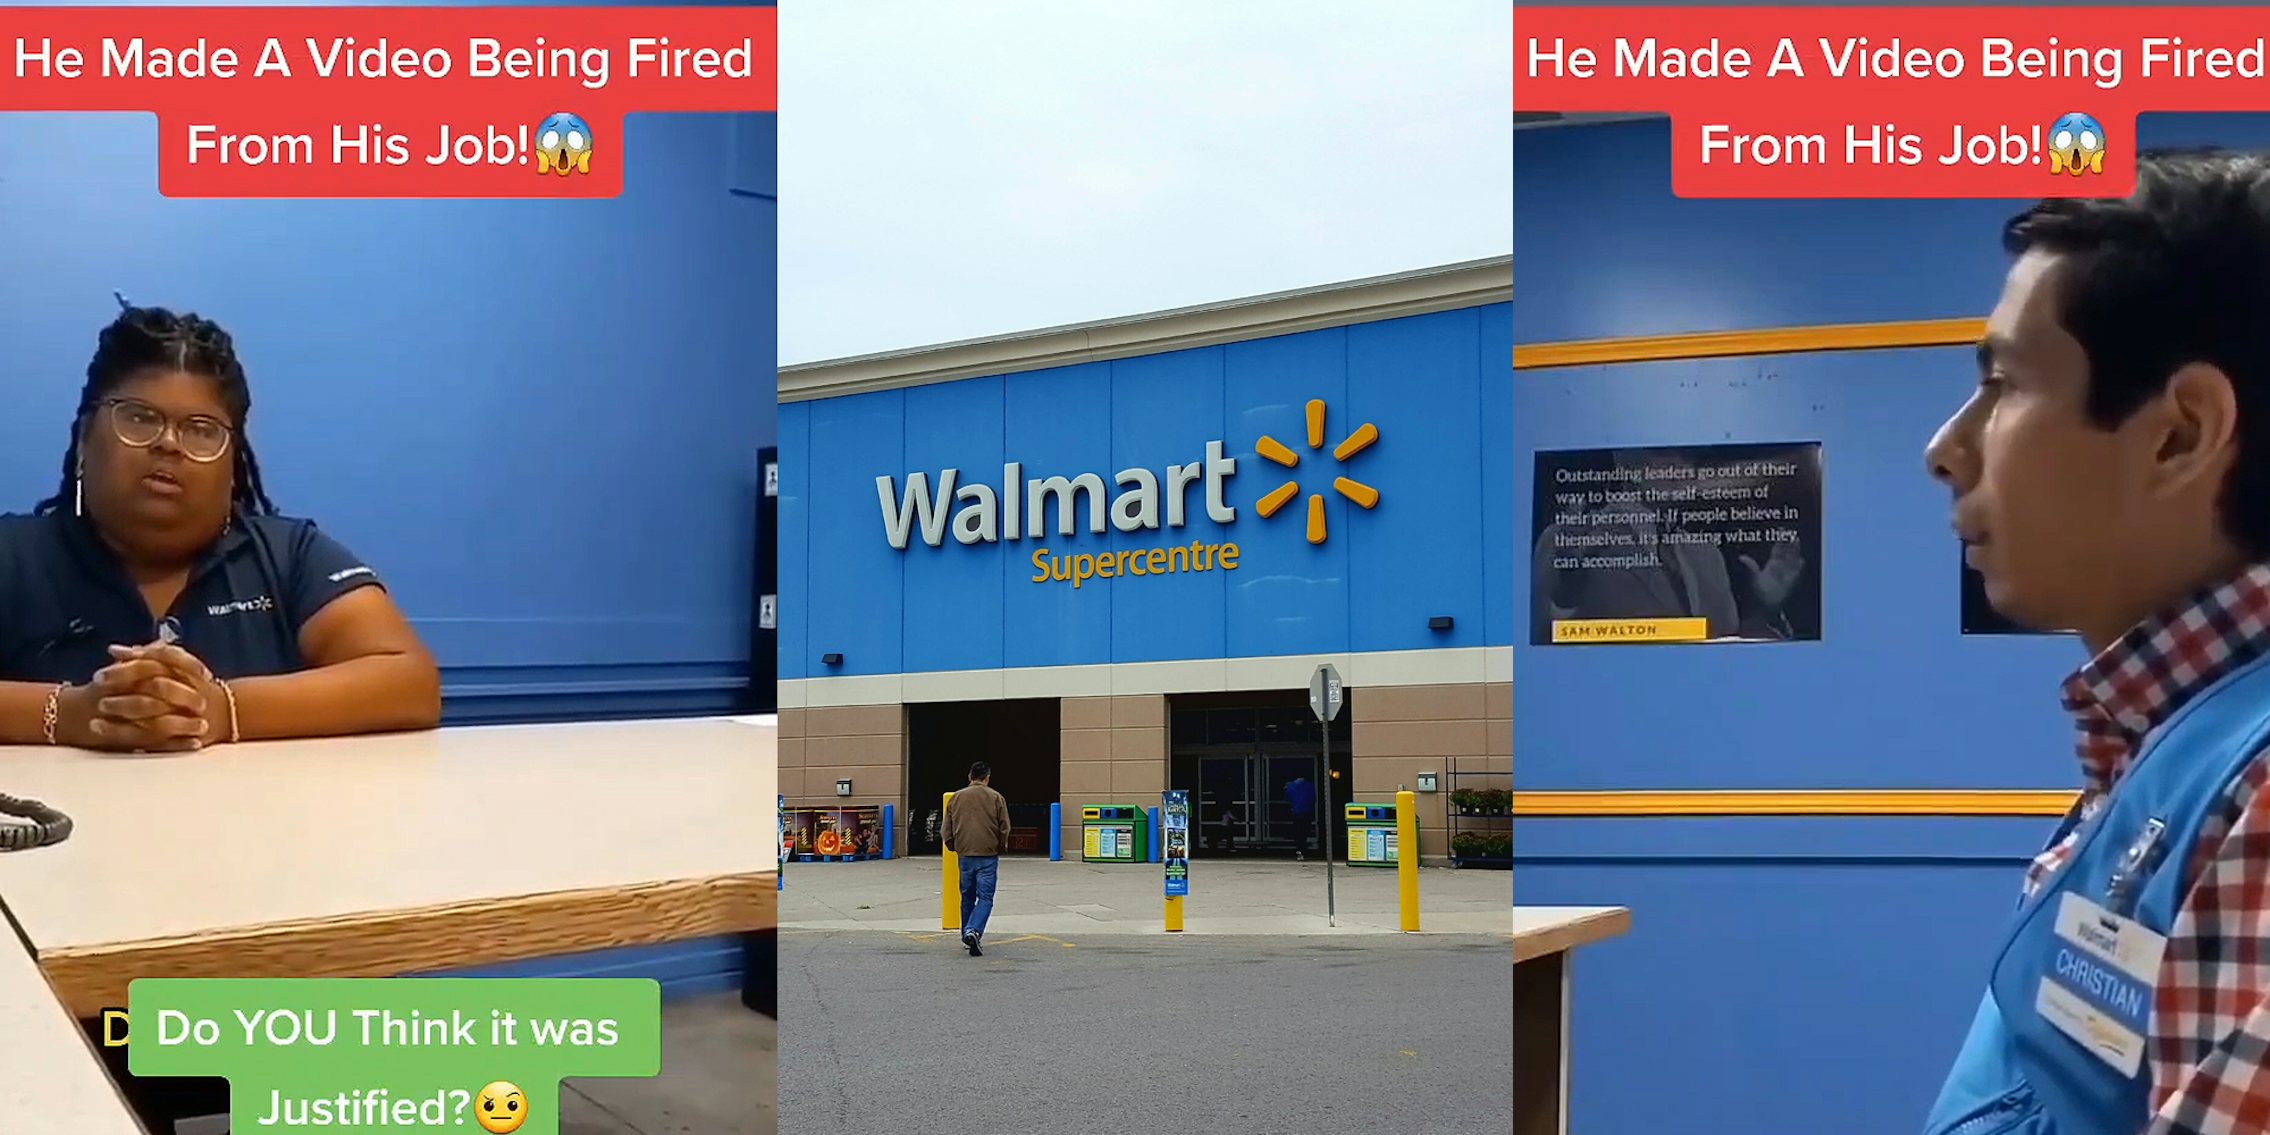 Walmart manager speaking sitting at desk caption 'He Made A Video Being Fired From His Job!' 'Do YOU Think it was Justified?' (l) Walmart store with sign (c) Walmart employee sitting down in front of desk caption 'He Made A Video Being Fired From His Job!' (r)